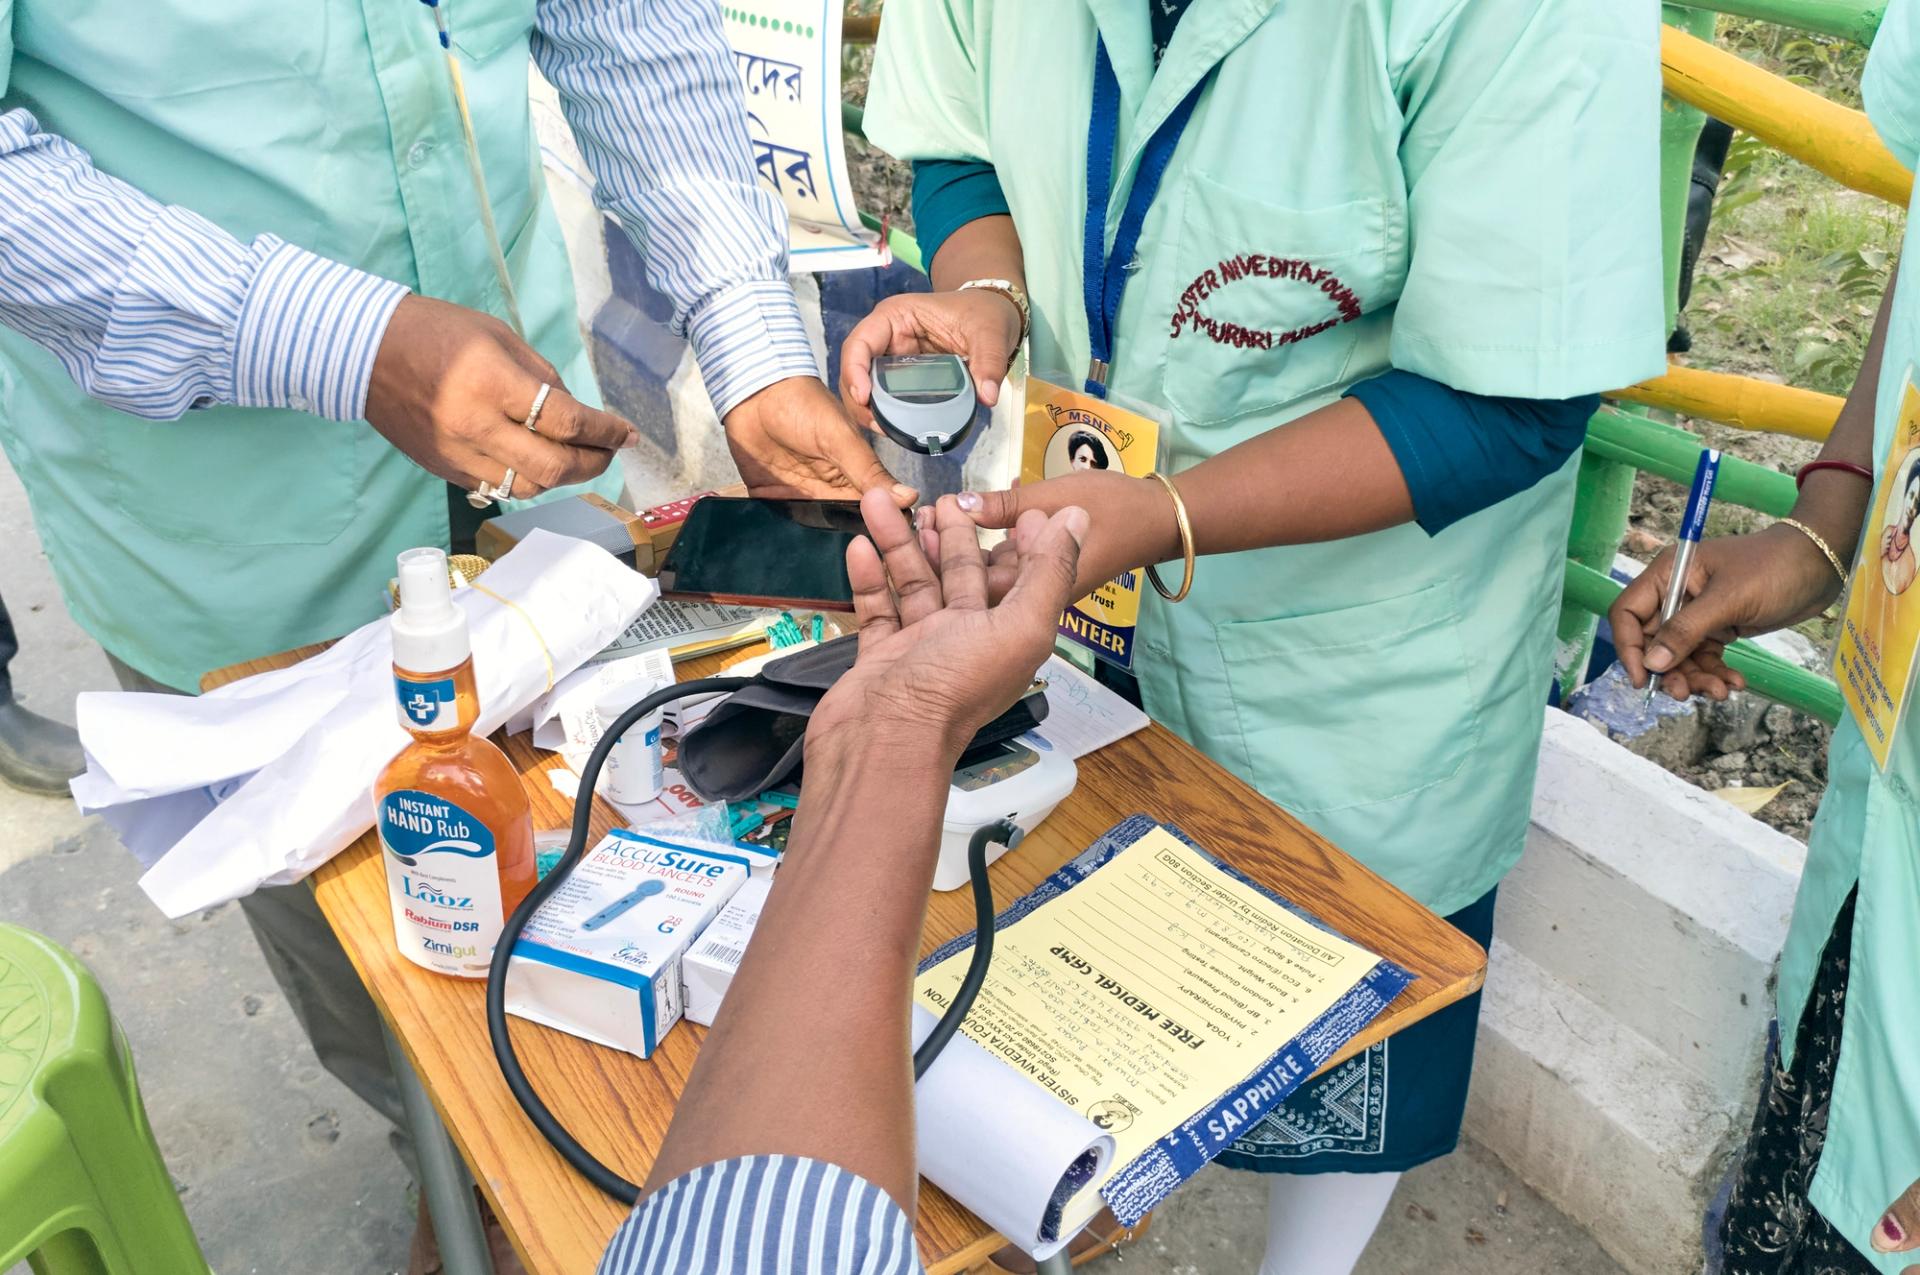 Health technicians checking blood sugar level of a person, using a digital glucometer at a roadside free health checkup camp in India.